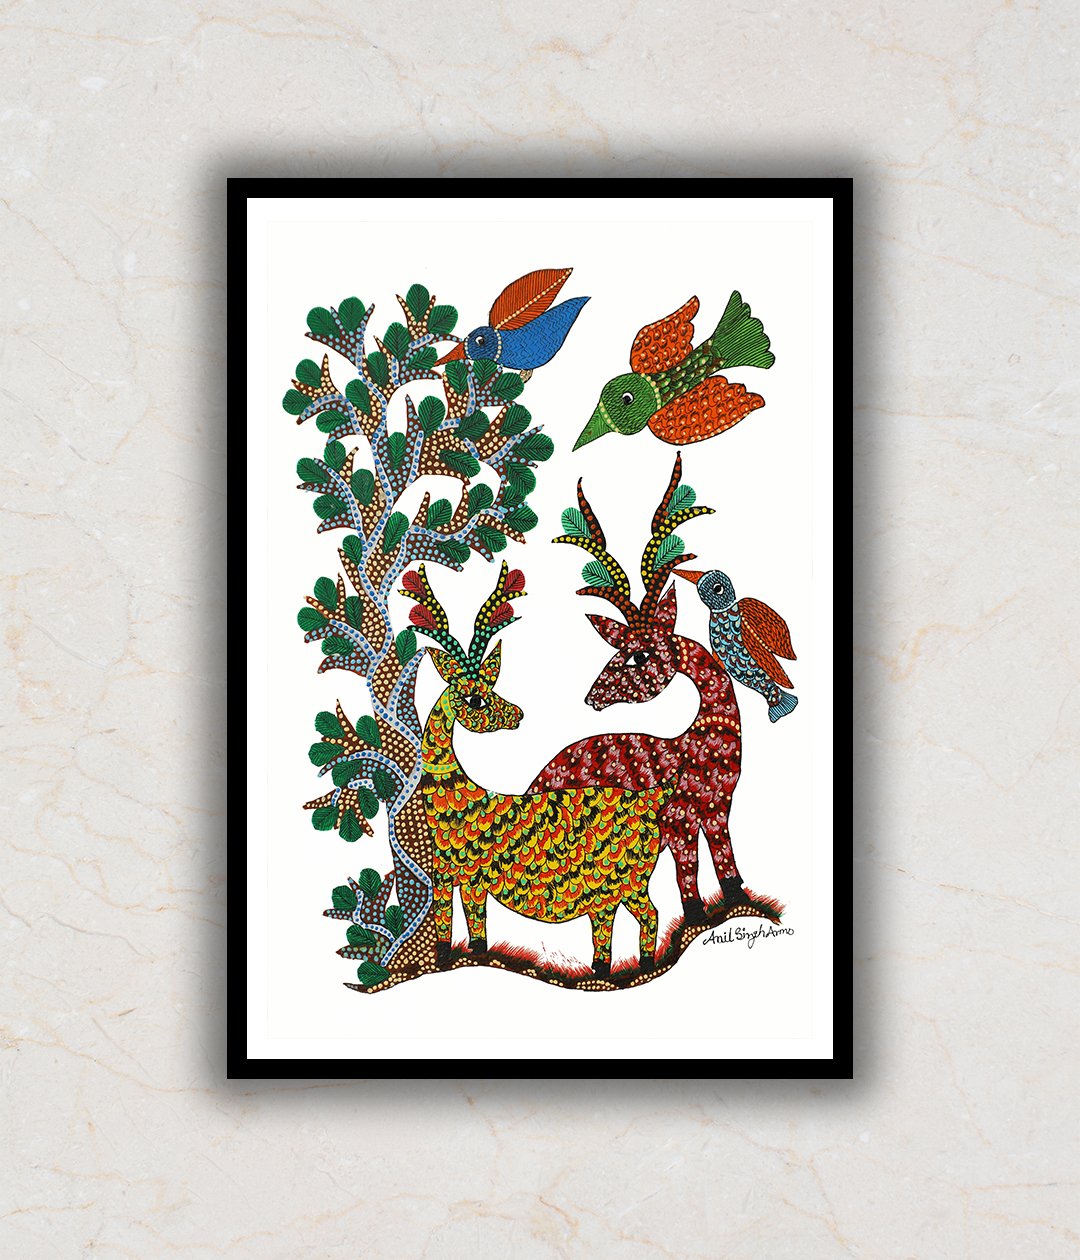 Two Deers and Tree Gond Art Painting For Home Wall Art Decor